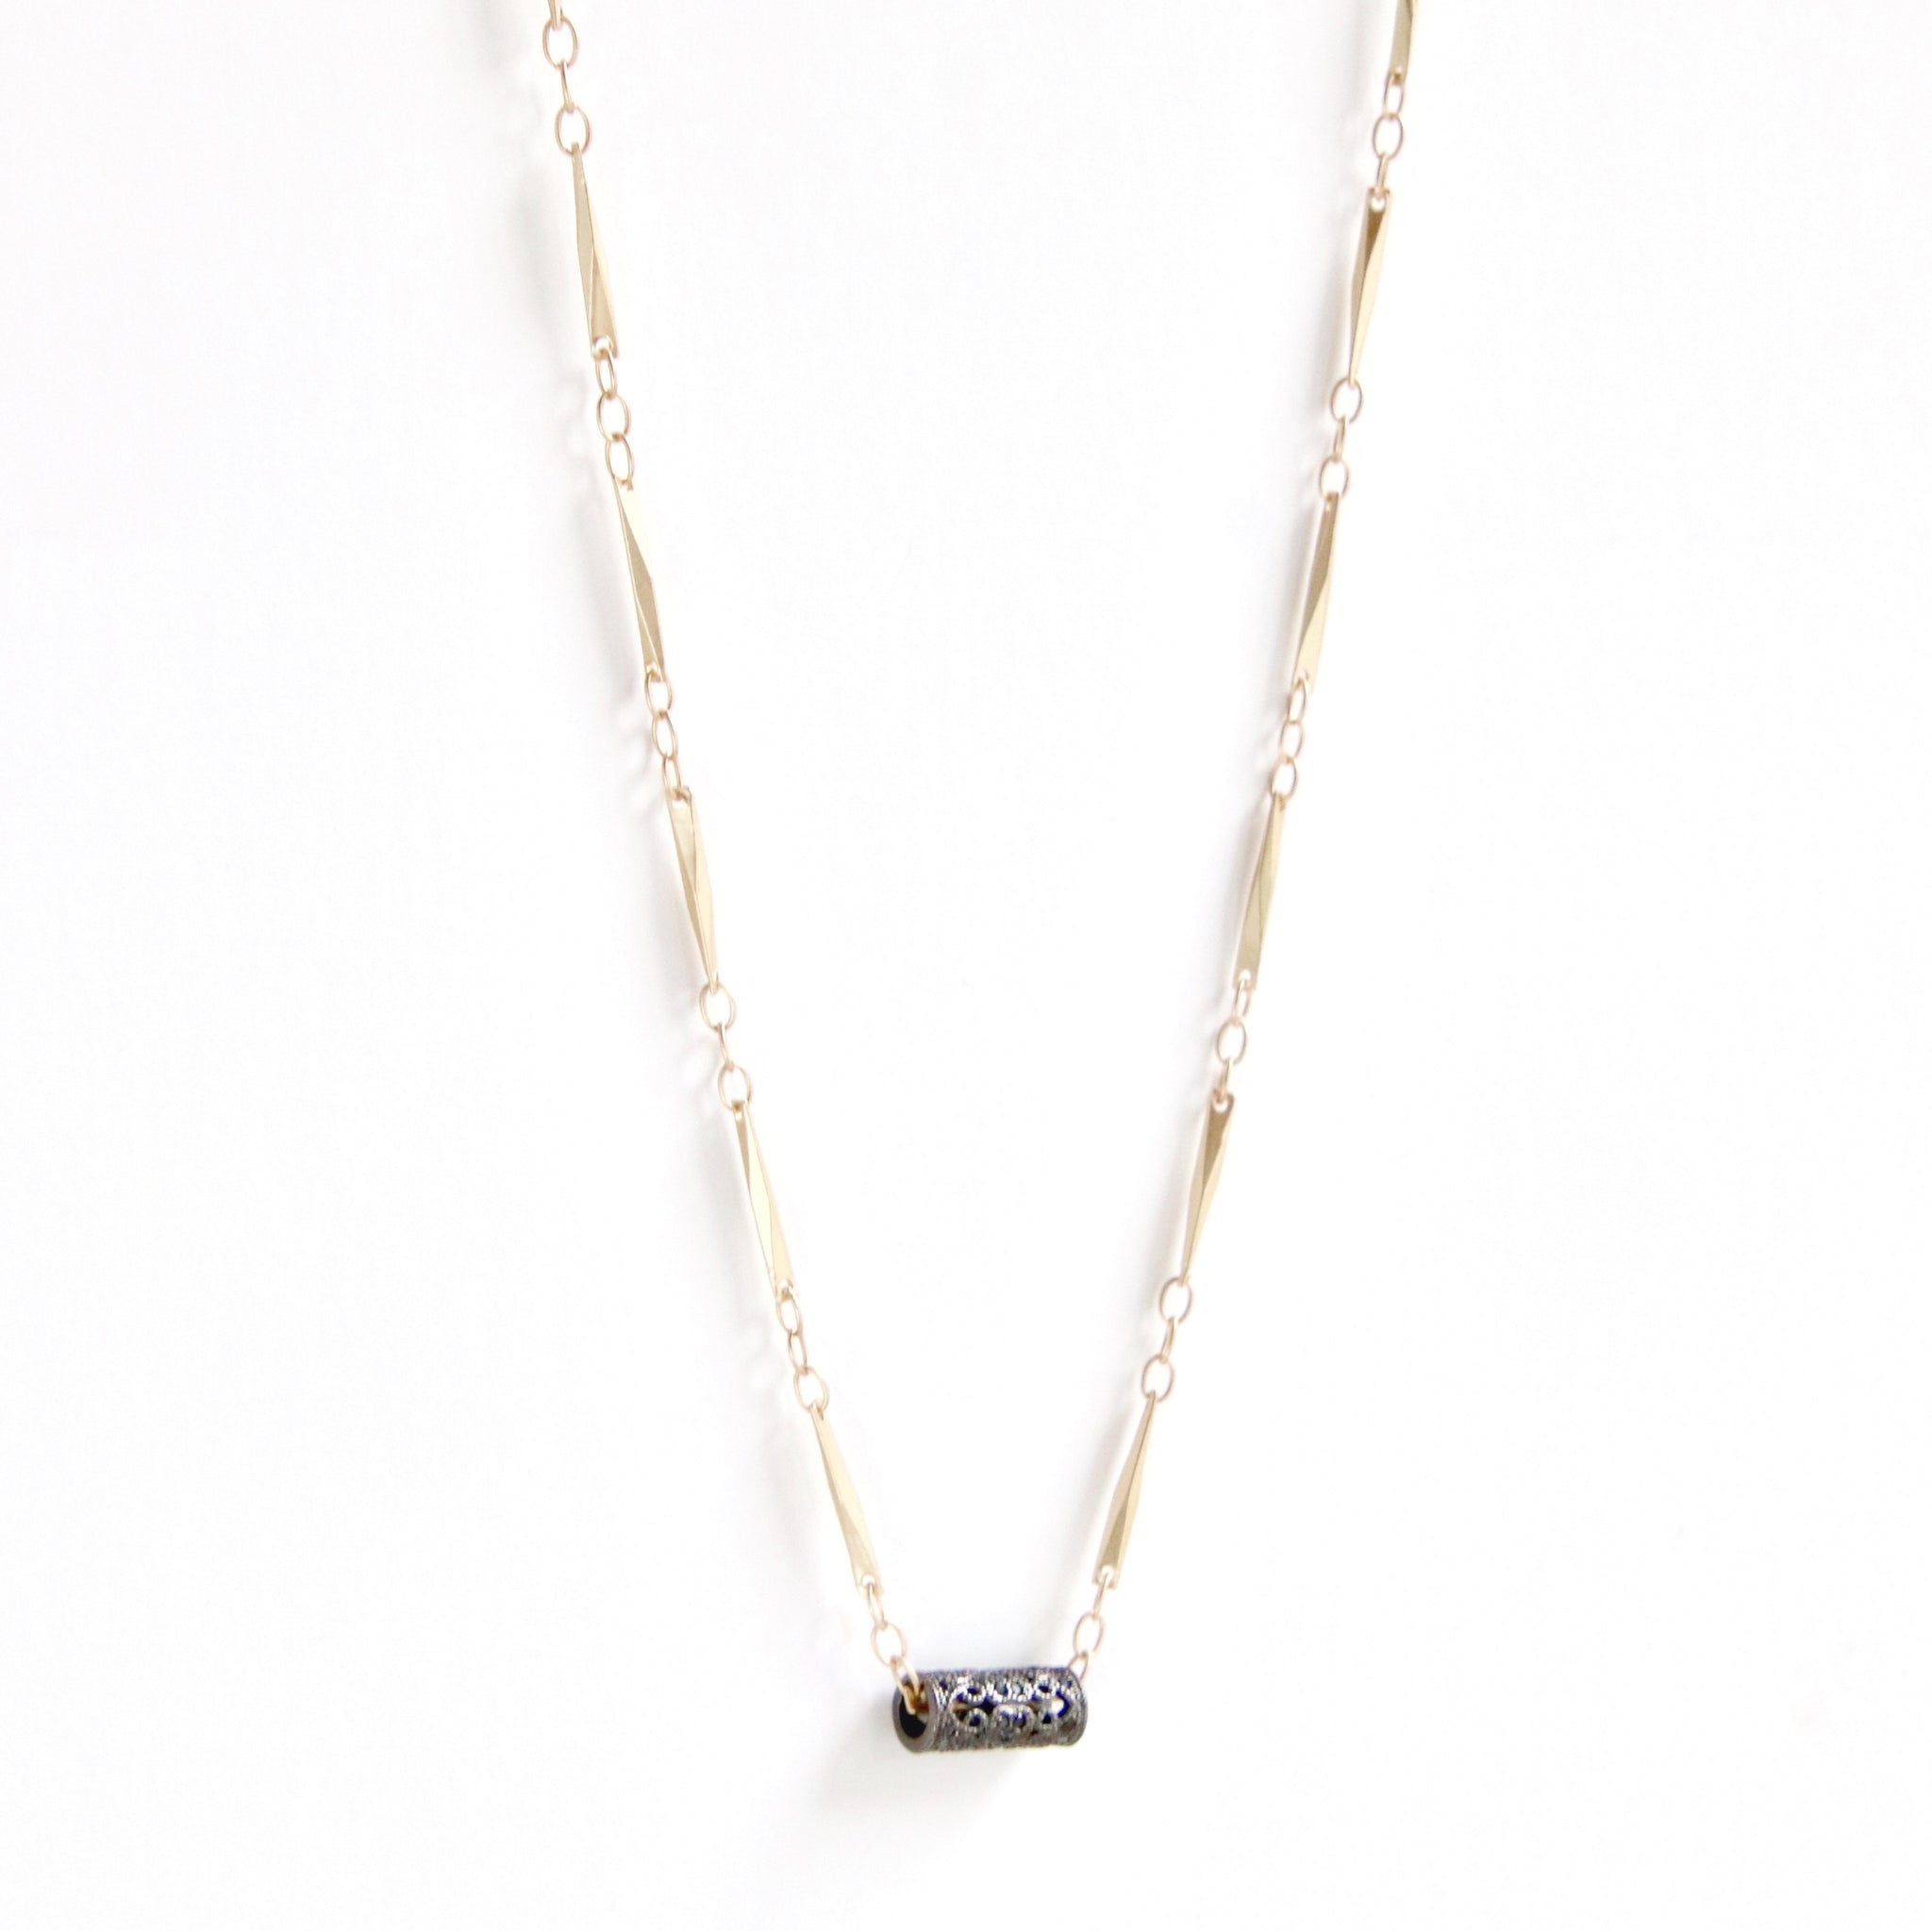 “Ruth” Pave’ Black Slide On Angie Chain